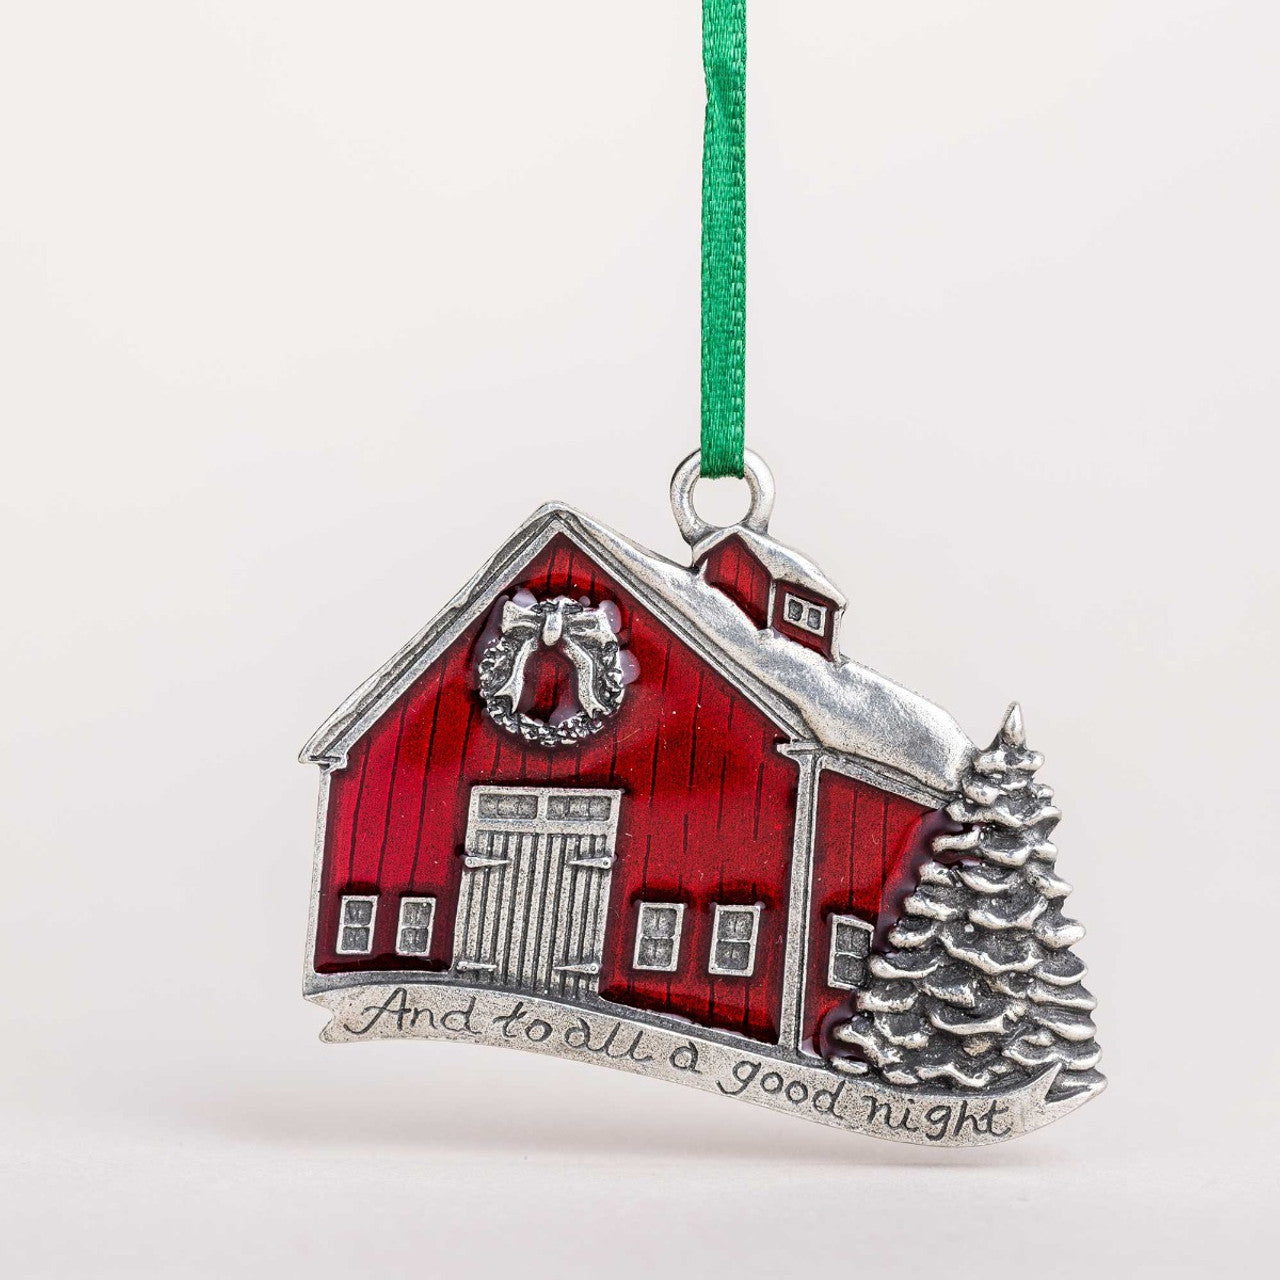 Danforth Pewter "A good night" ornament - red barn with wreath and pine tree with "and to all a good night" banner at bottom 